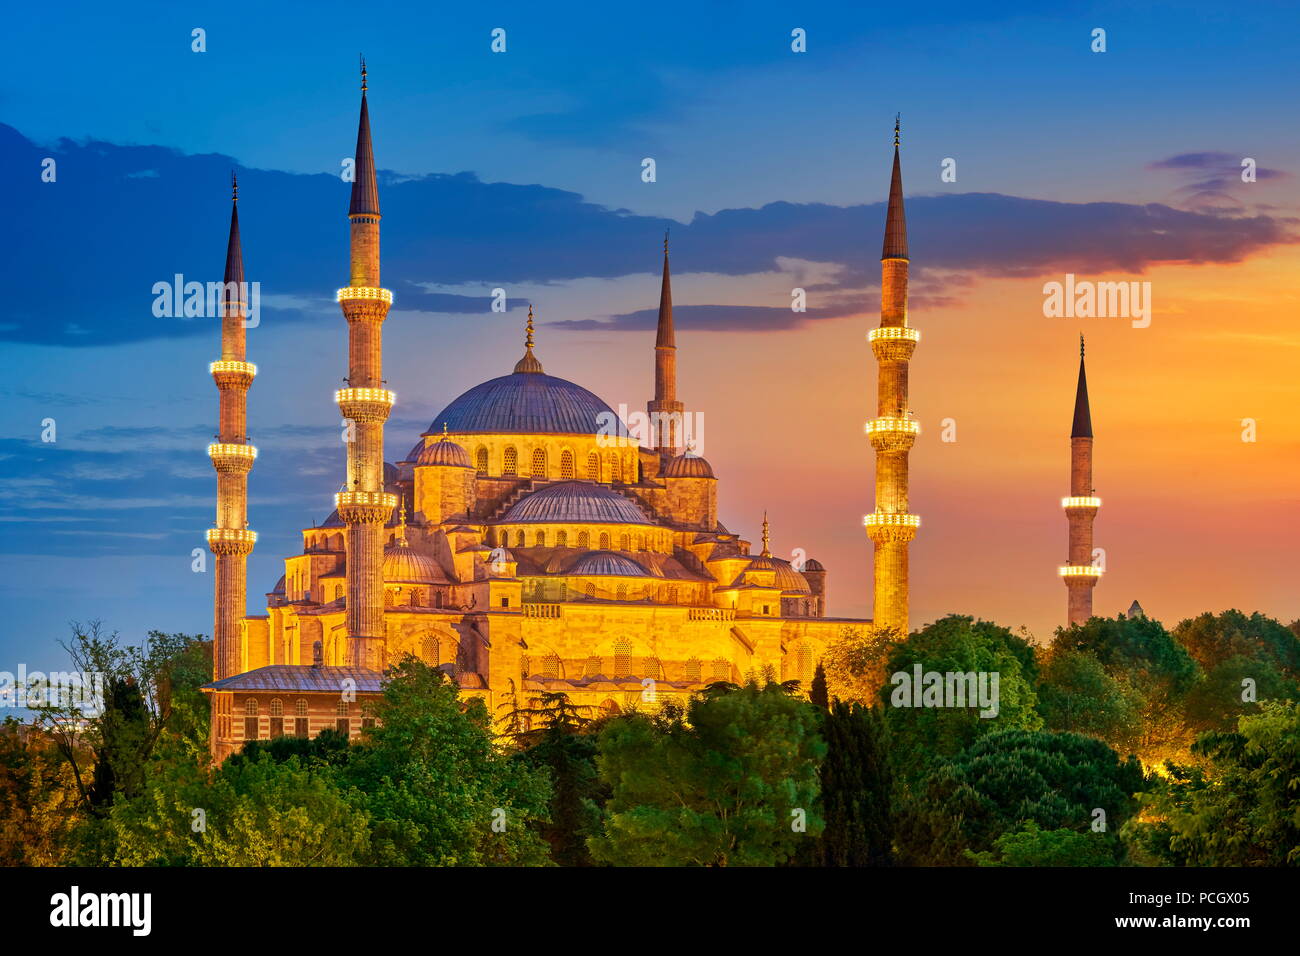 Blue Mosque, Sultan Ahmed Mosque, UNESCO World Heritage Site, Istanbul, Turkey Stock Photo